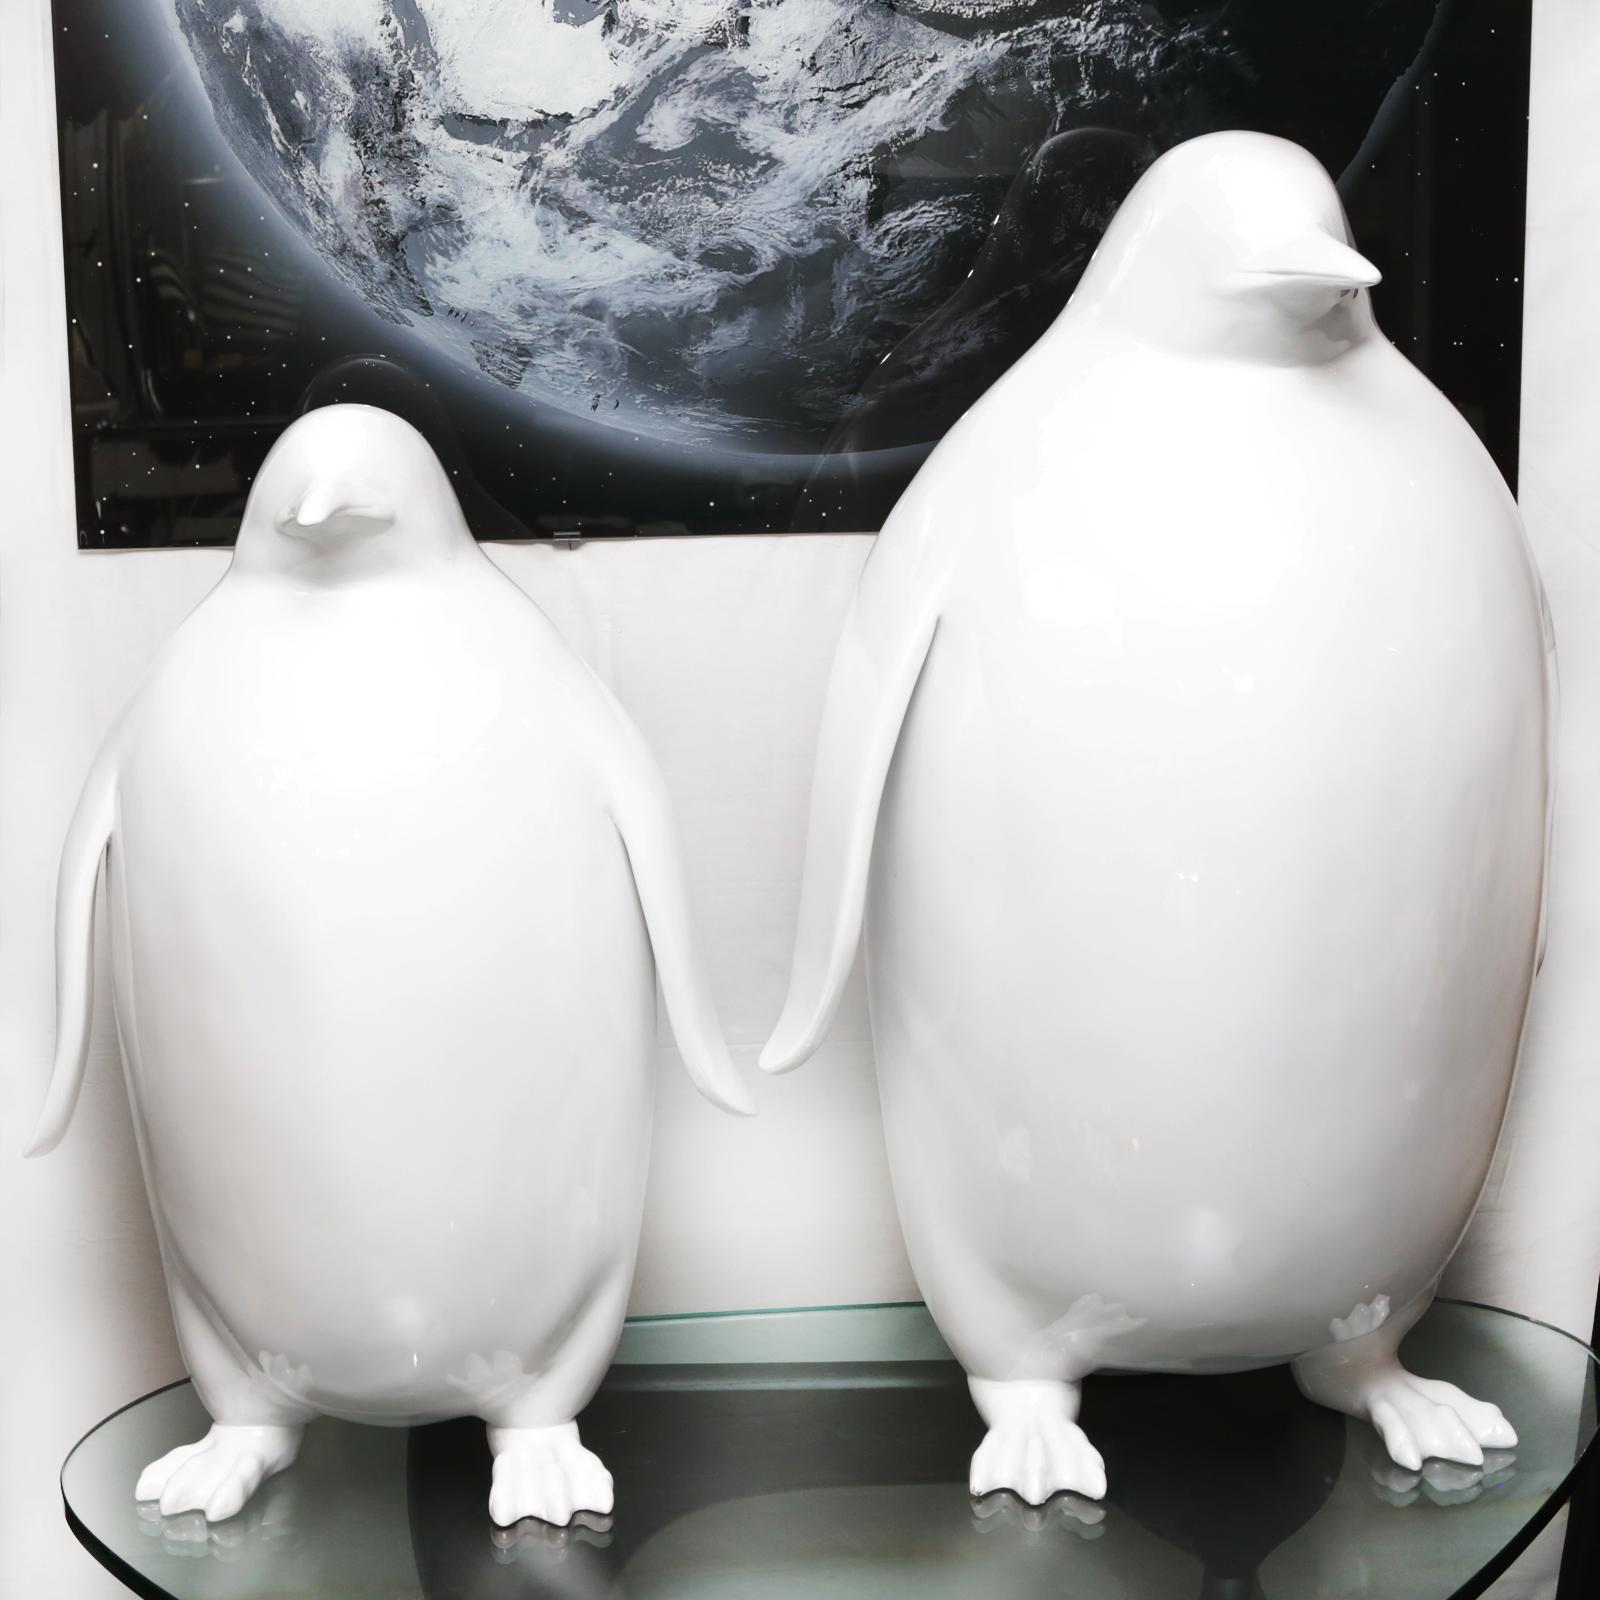 Emperor penguin set of 2 sculpture in white
lacquered resin. Set of 2 price: 9500,00€.
Created by David Rousselot – Paris
Two sizes available.
Measures:
Small model, L 50 x D 40 x H 85cm. Price: €4250.00
Small model available now.
Large